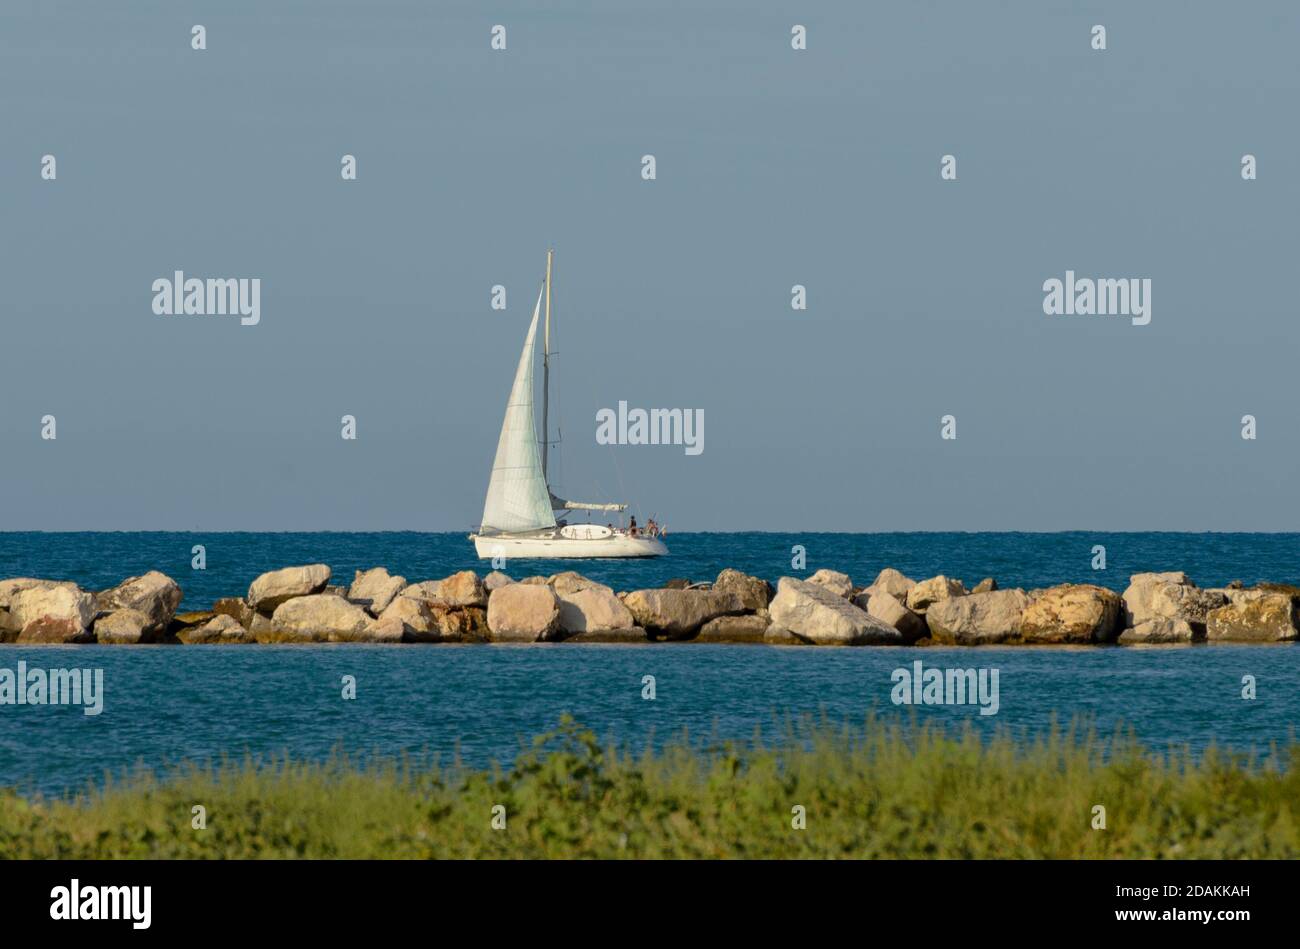 Sailboat in the middle of the sea near the coast Stock Photo